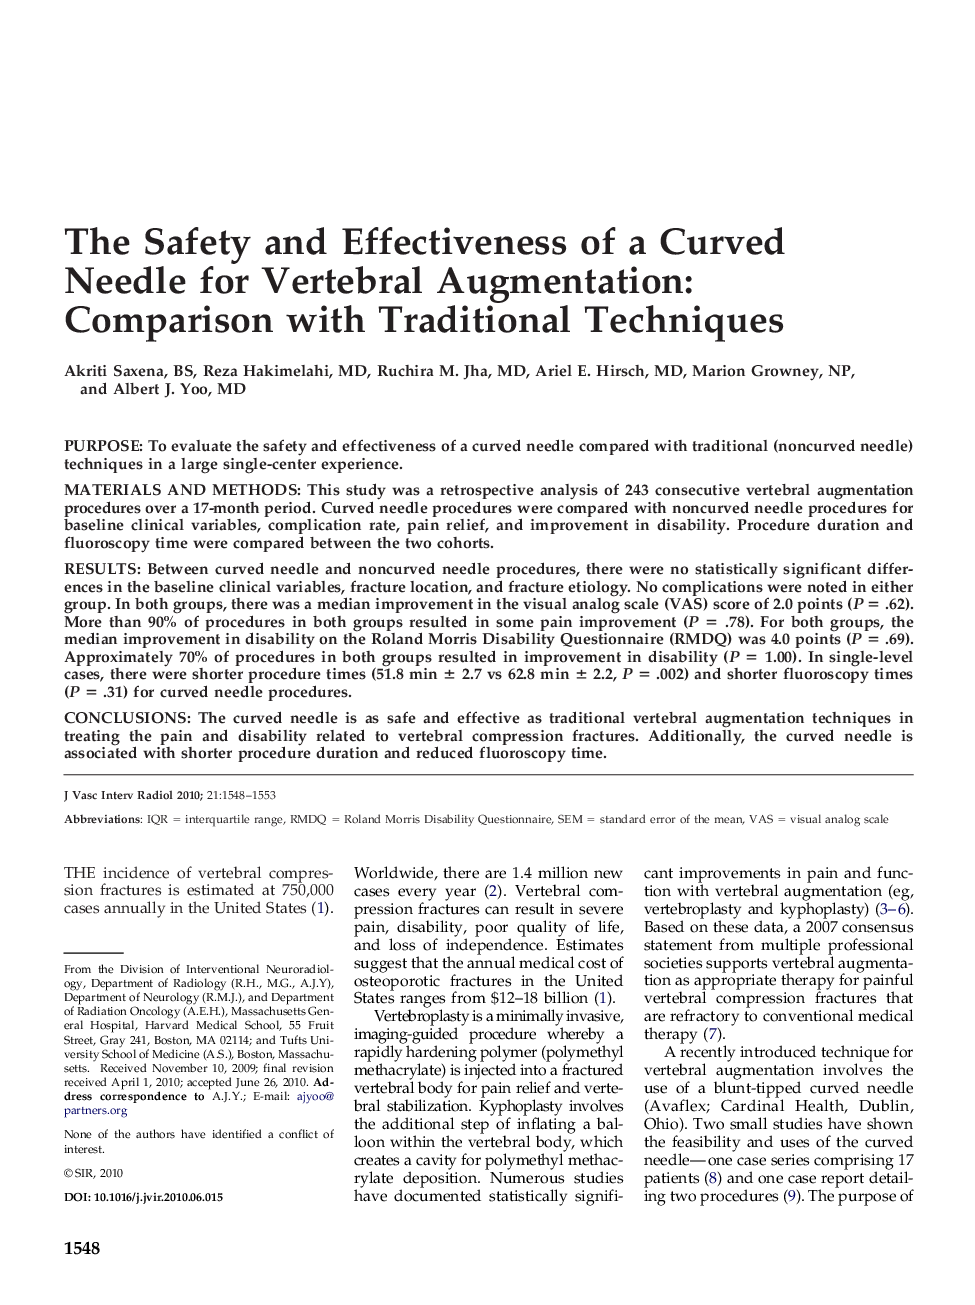 The Safety and Effectiveness of a Curved Needle for Vertebral Augmentation: Comparison with Traditional Techniques